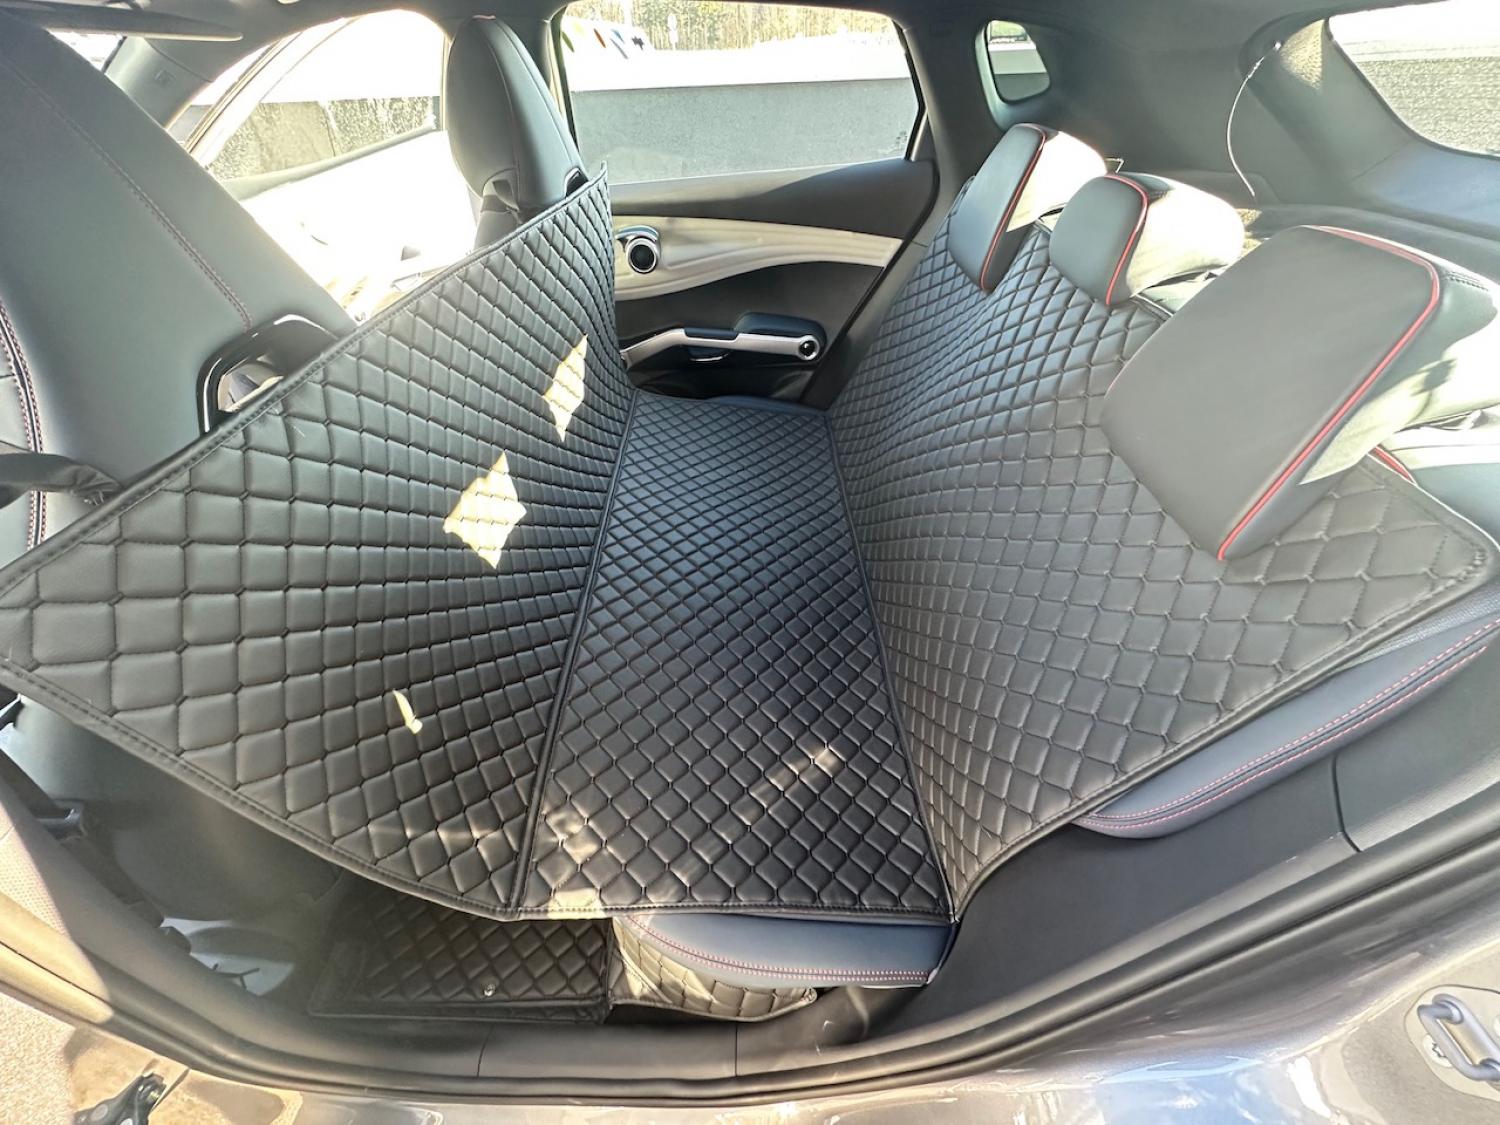 CARSTYLER® Back Seat Cover Geeignet Für MG ZS EV